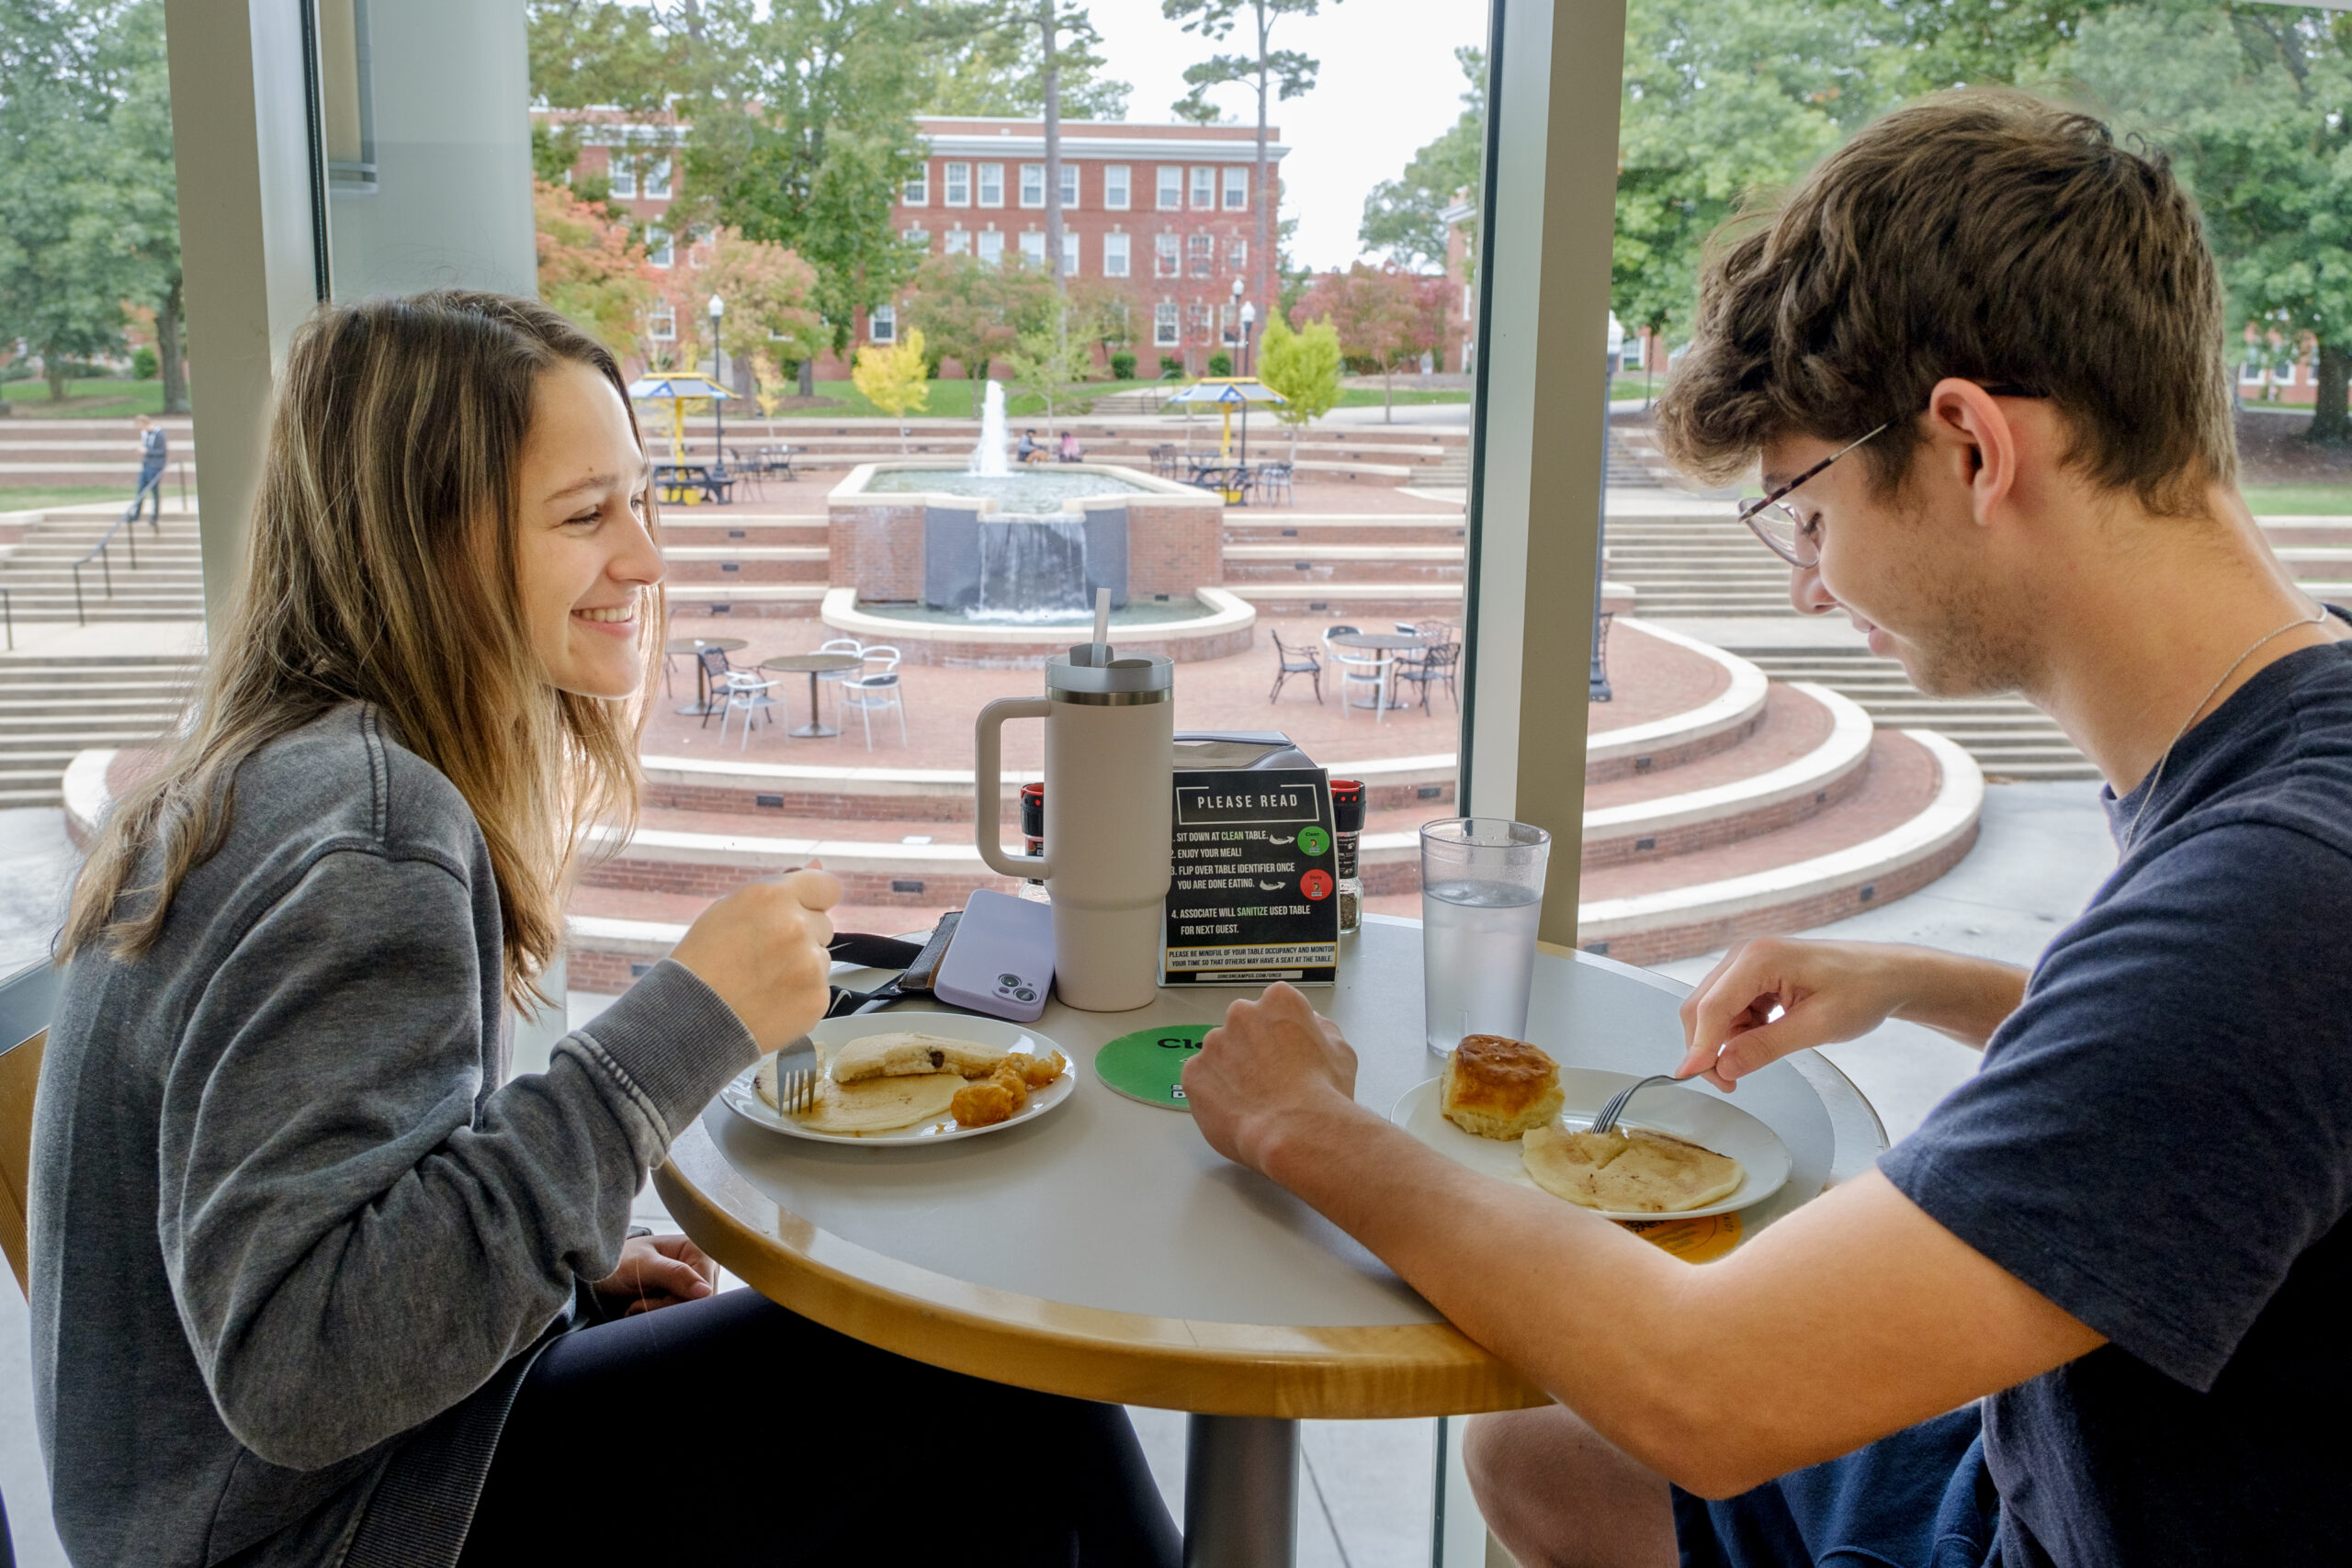 First year students Dianna Liana and Austin eat at a table in the UNCG dining hall.